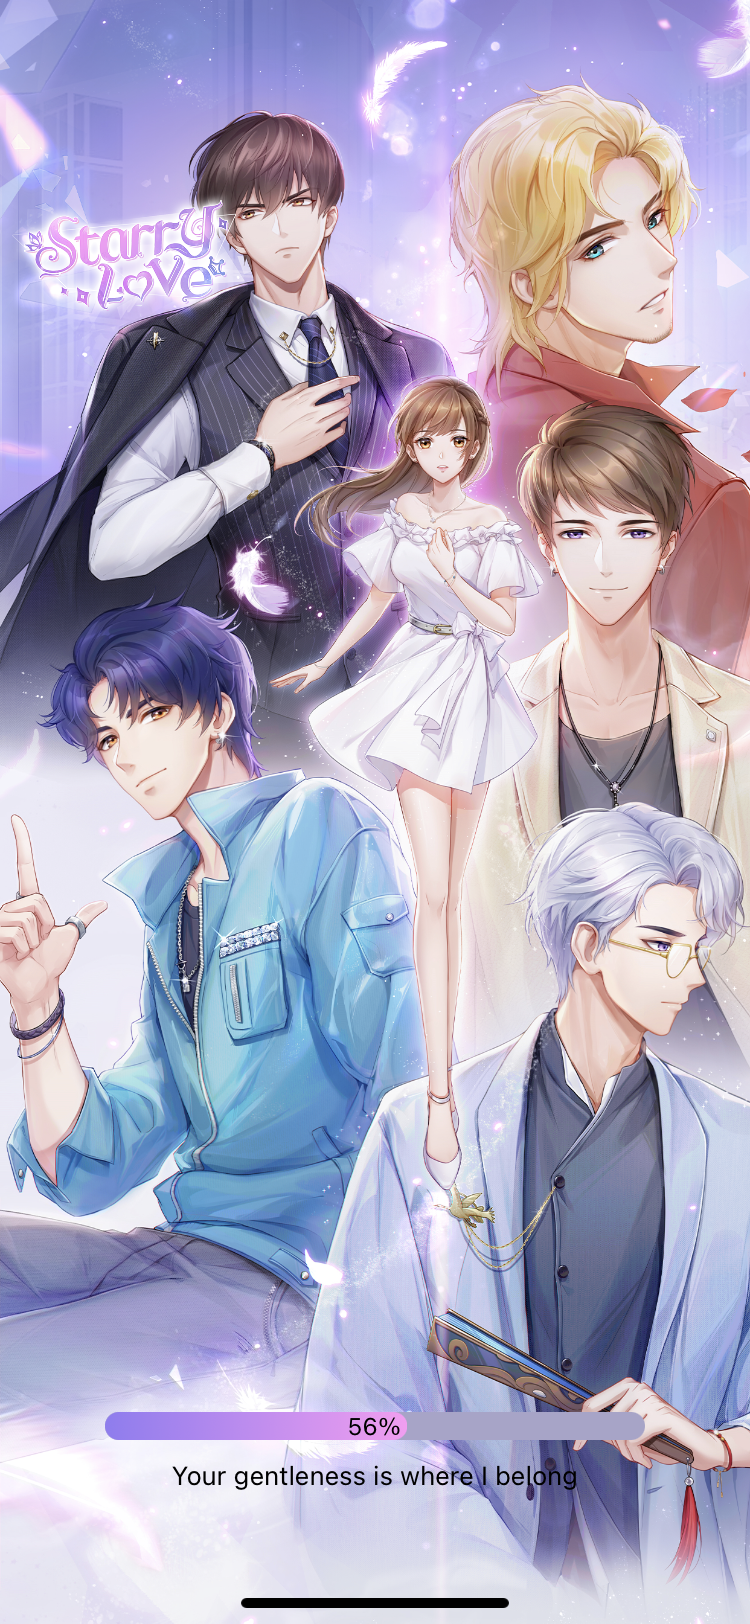 Starry Love Anime Dressup Otome Game Review Like Love Niki, Wannabe Fashionista, or Mr Love Queen’s Choice